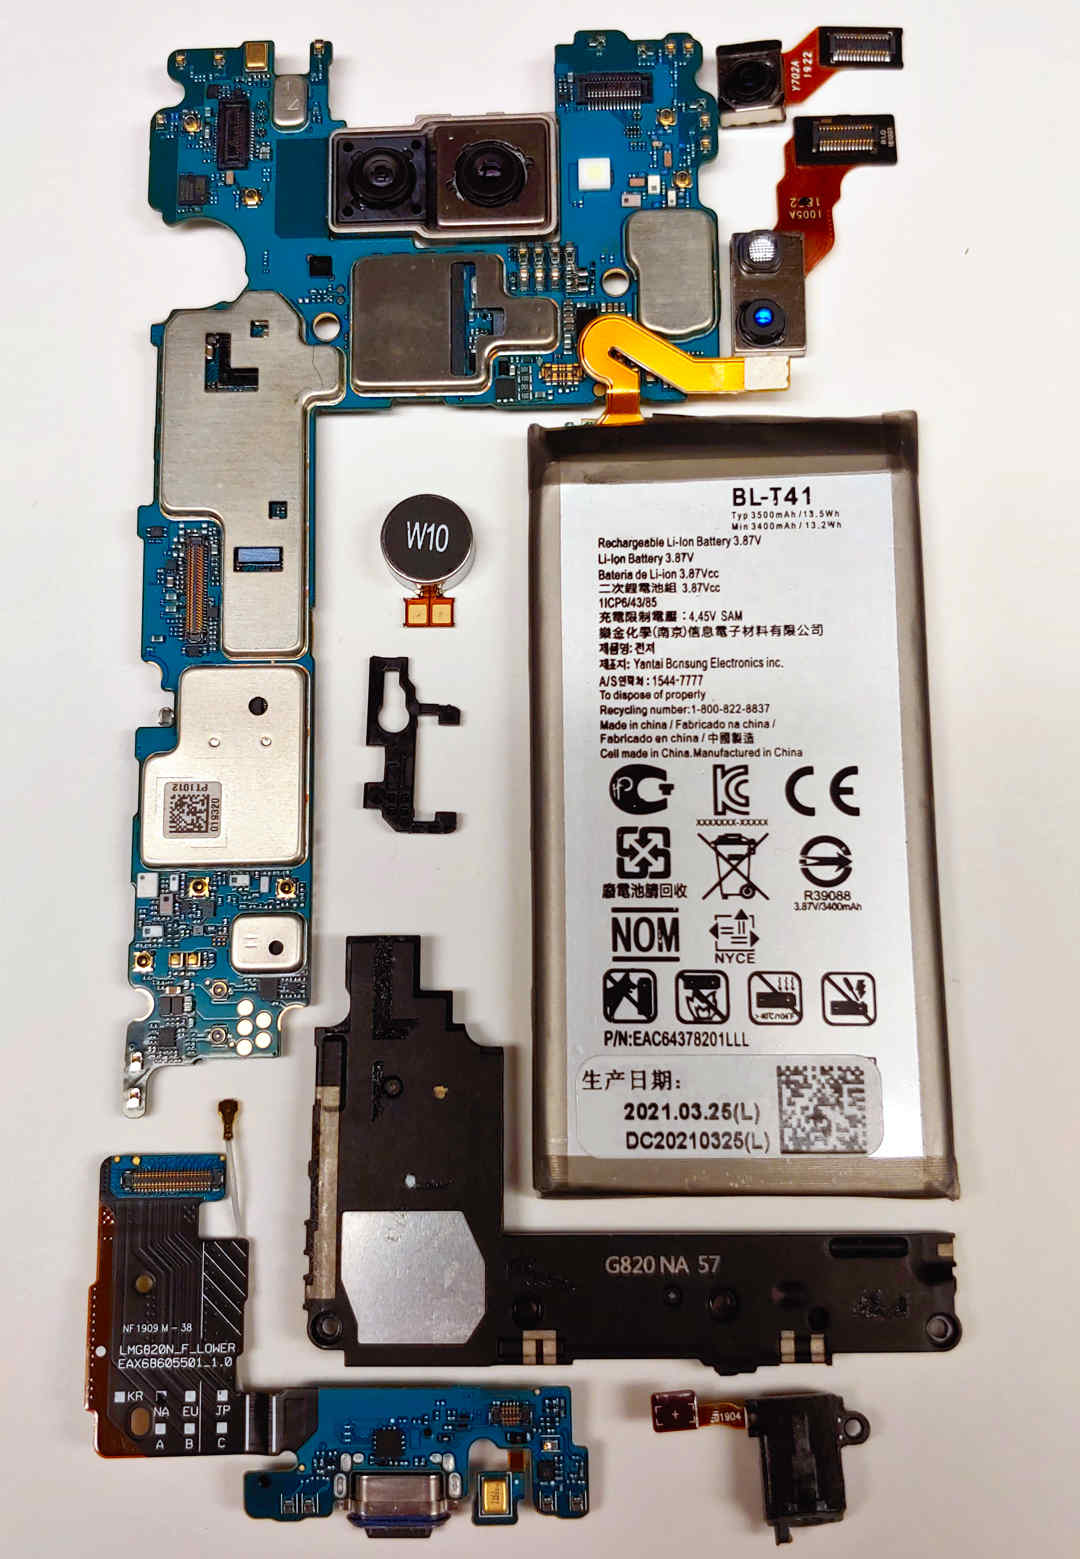 LG G8 view of all parts